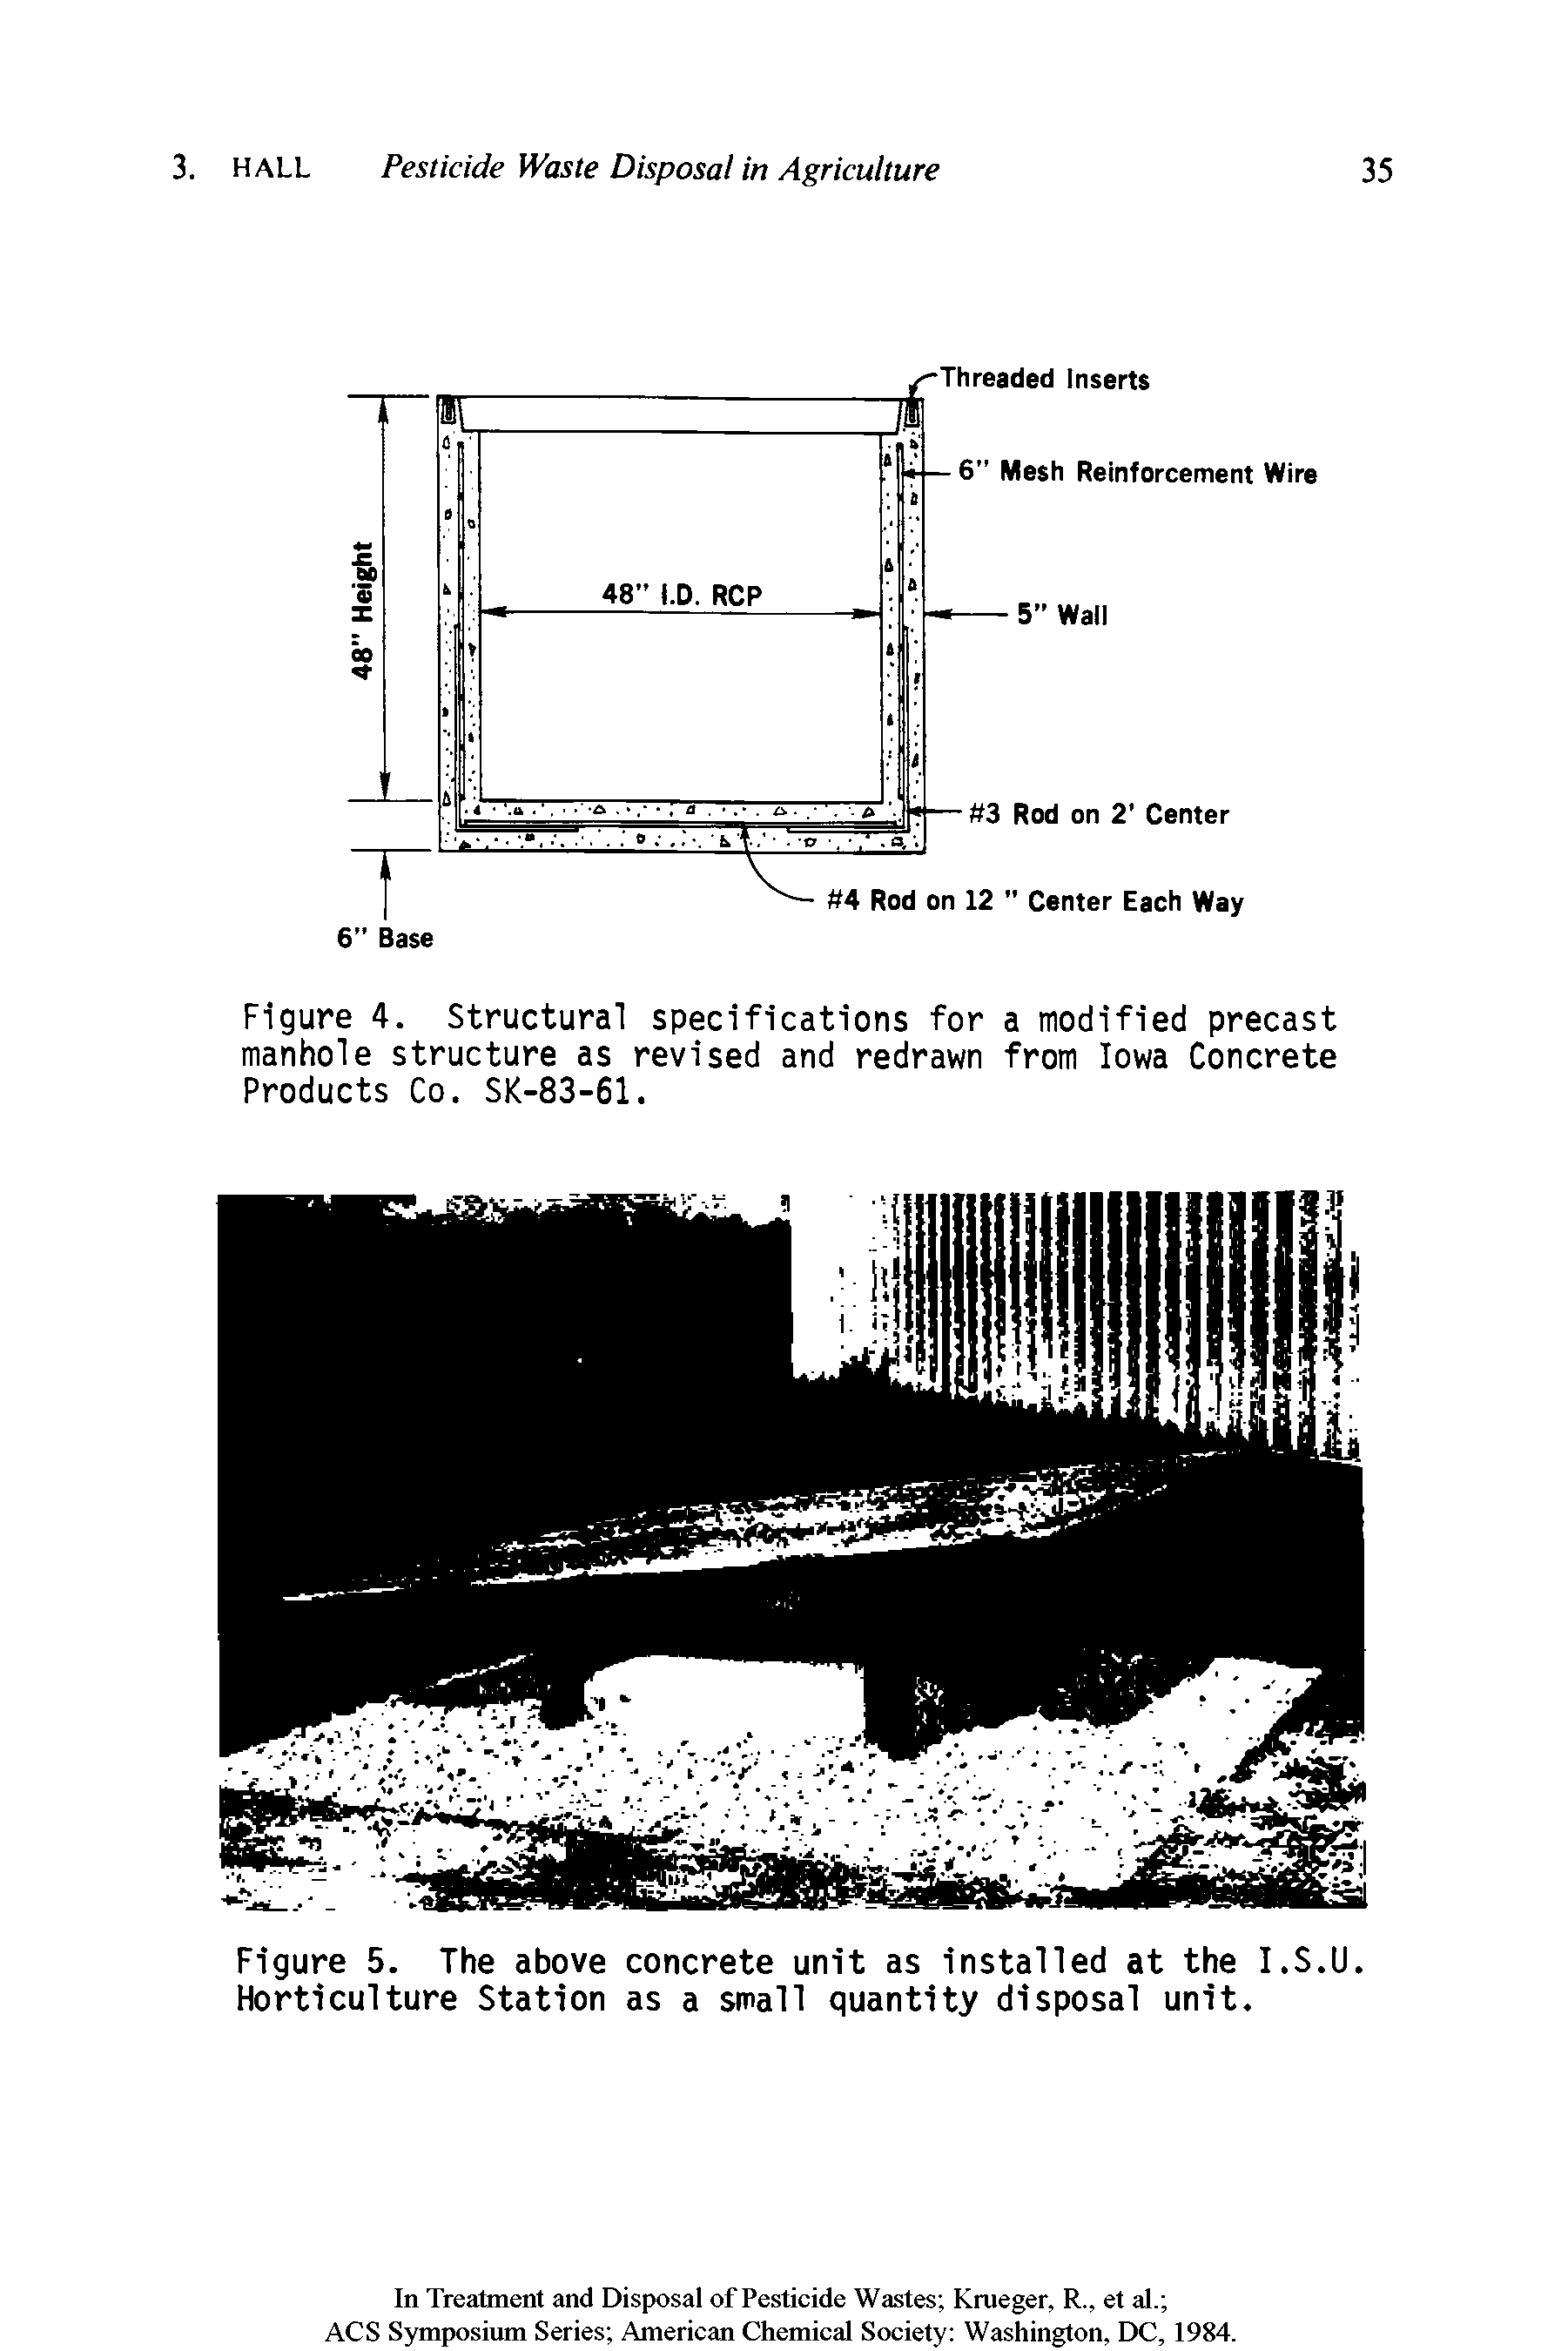 Figure 4. Structural specifications for a modified precast manhole structure as revised and redrawn from Iowa Concrete Products Co. SK-83-61.